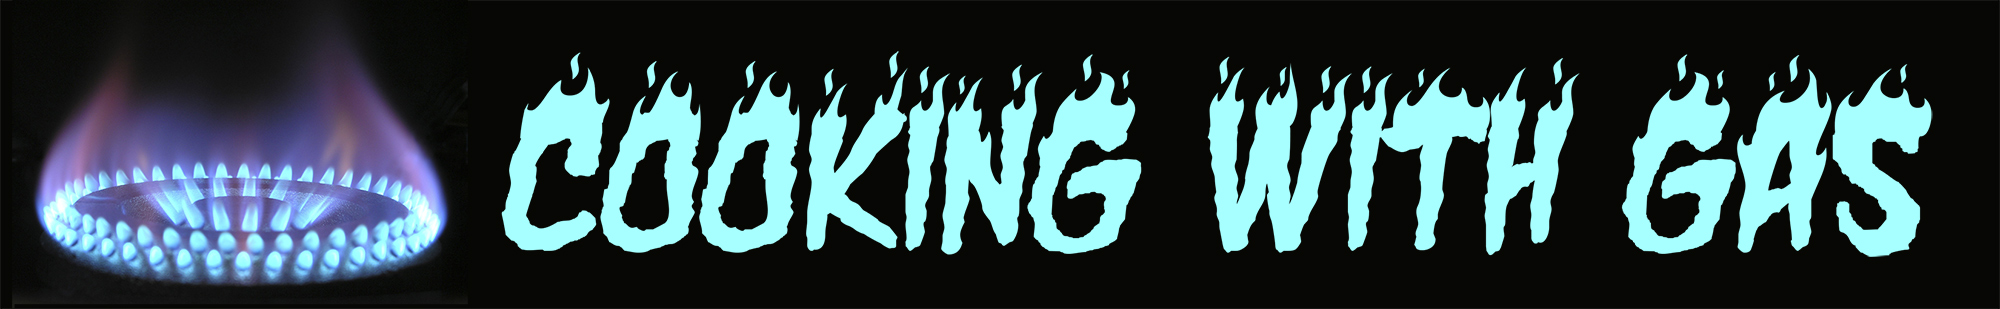 Cooking with Gas typographic blue fire illustrative title in uppercase letters form within a black border box next to a small fire stove burner slot image